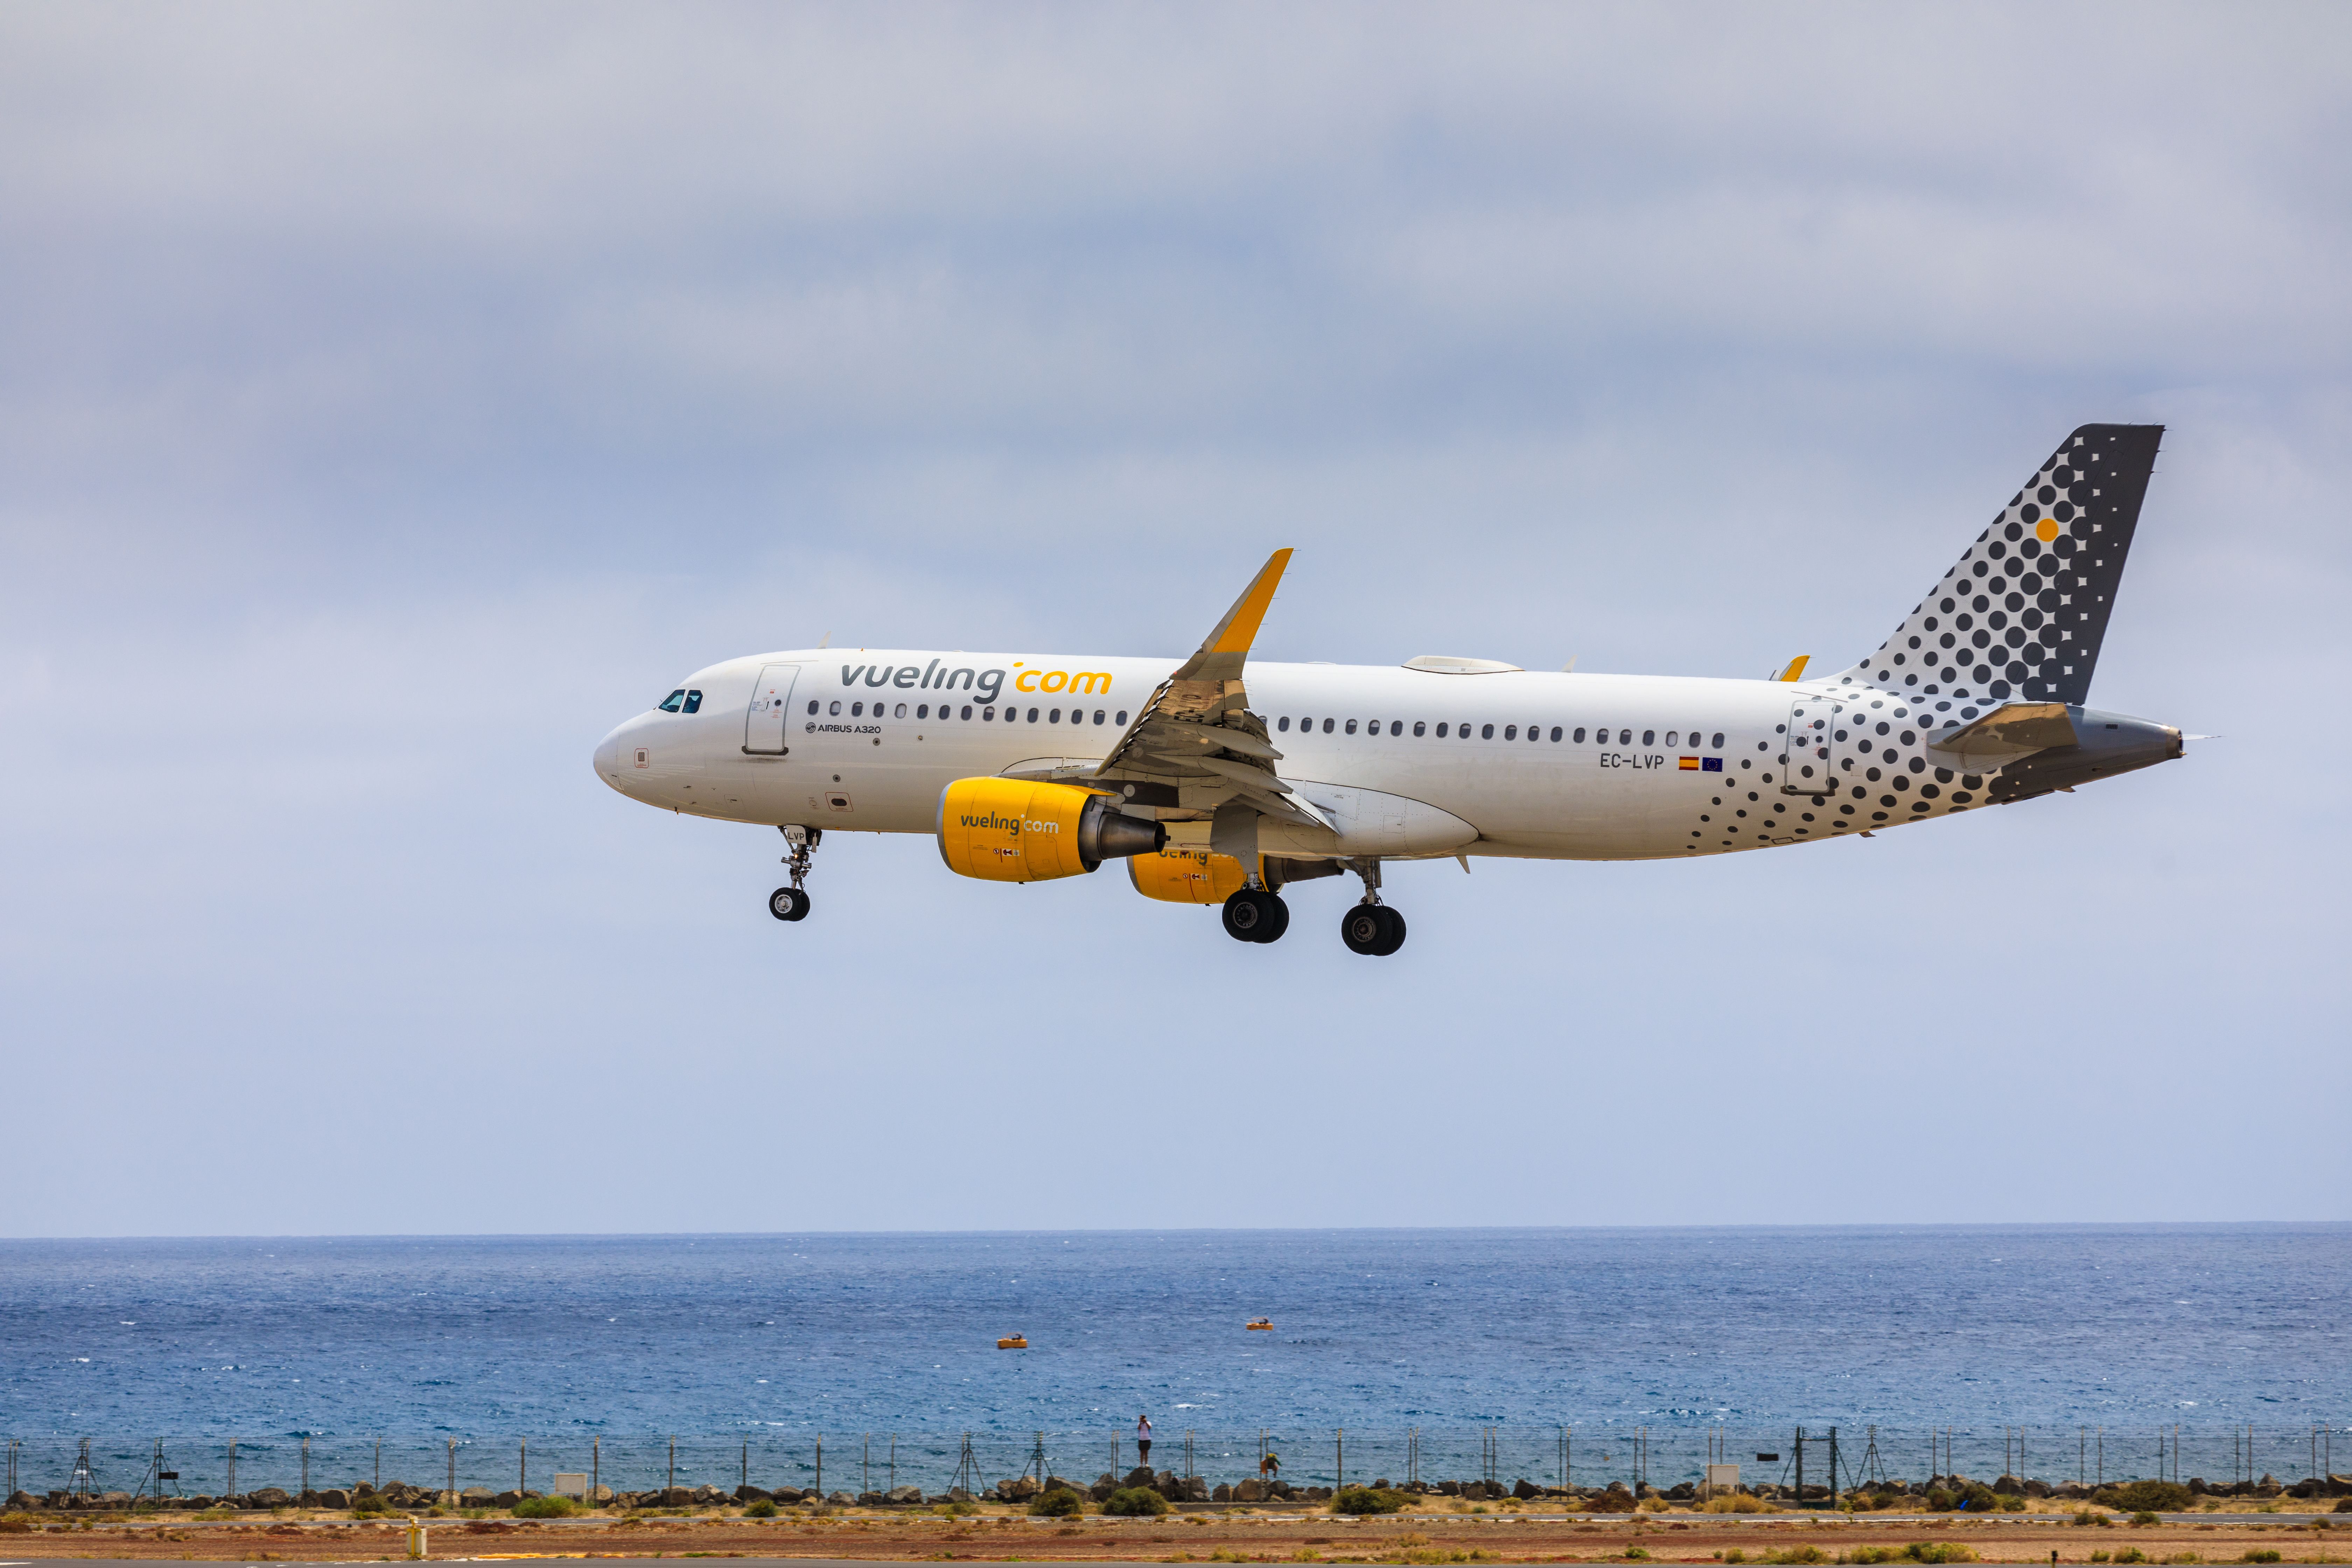 A Vueling Airbus A320 Landing In Lanzarote.